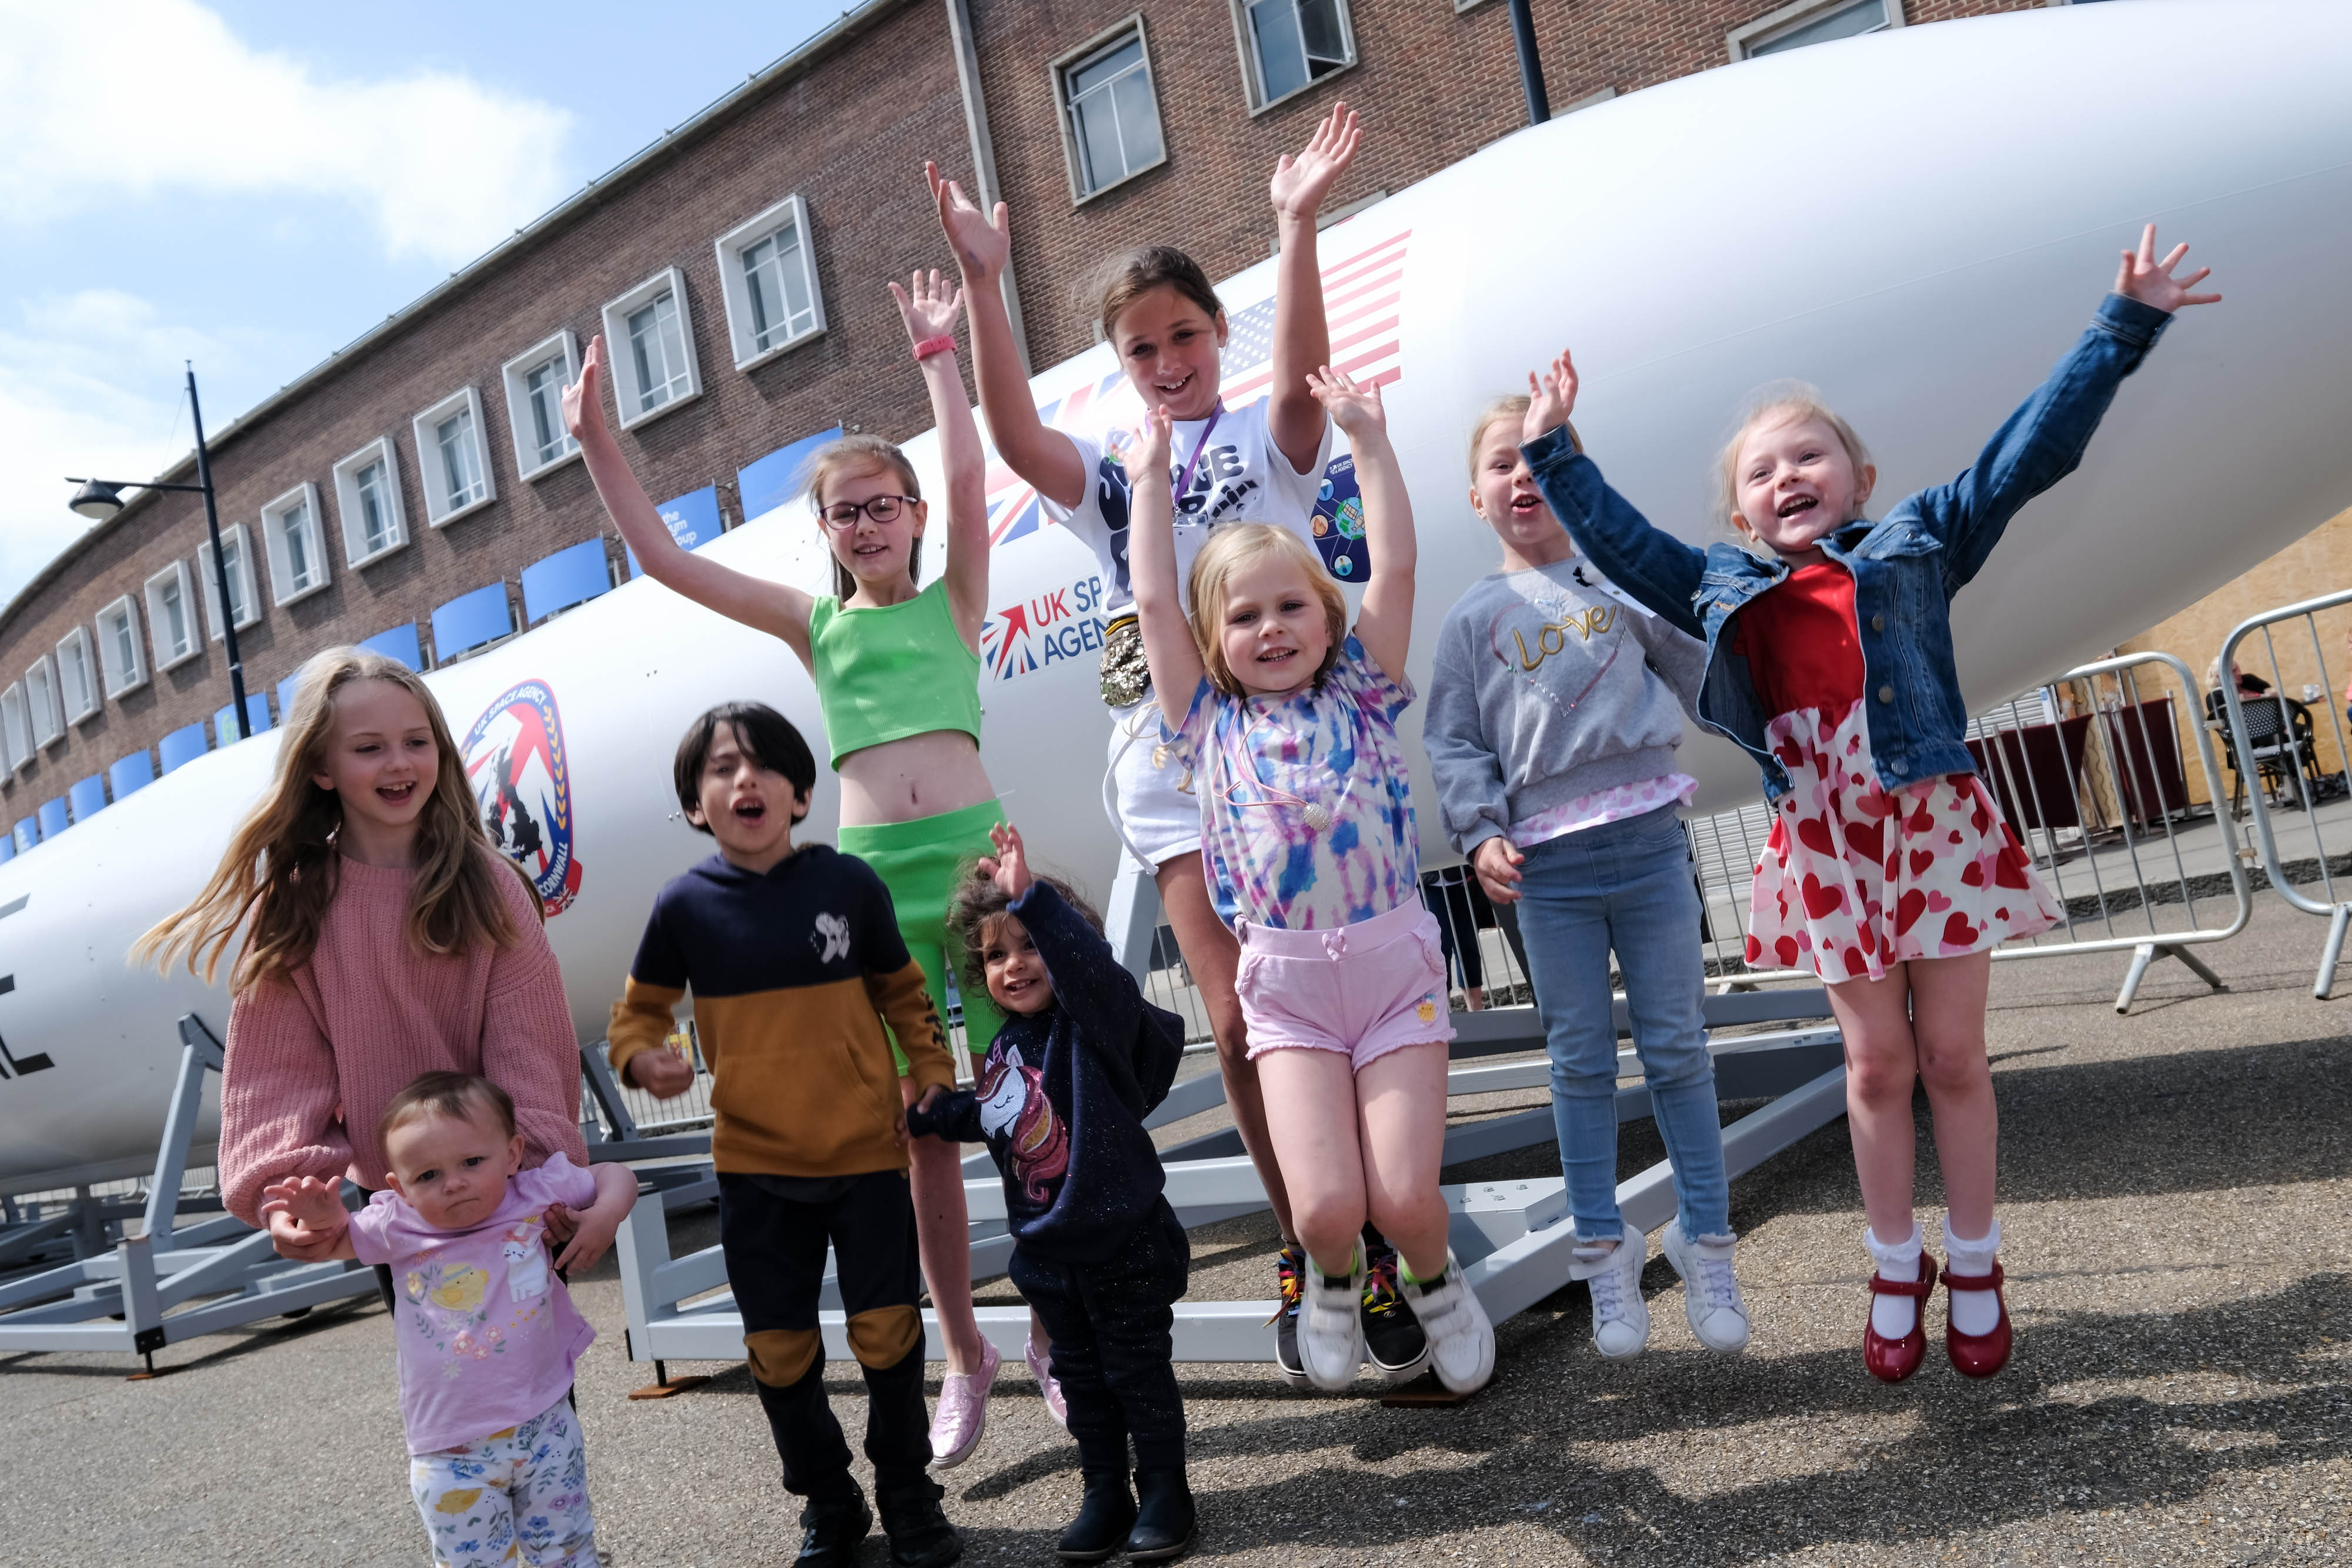 Children at the launch of the UK Space Agency’s ‘Space for Everyone’ tour in West Bargate, Southampton. 